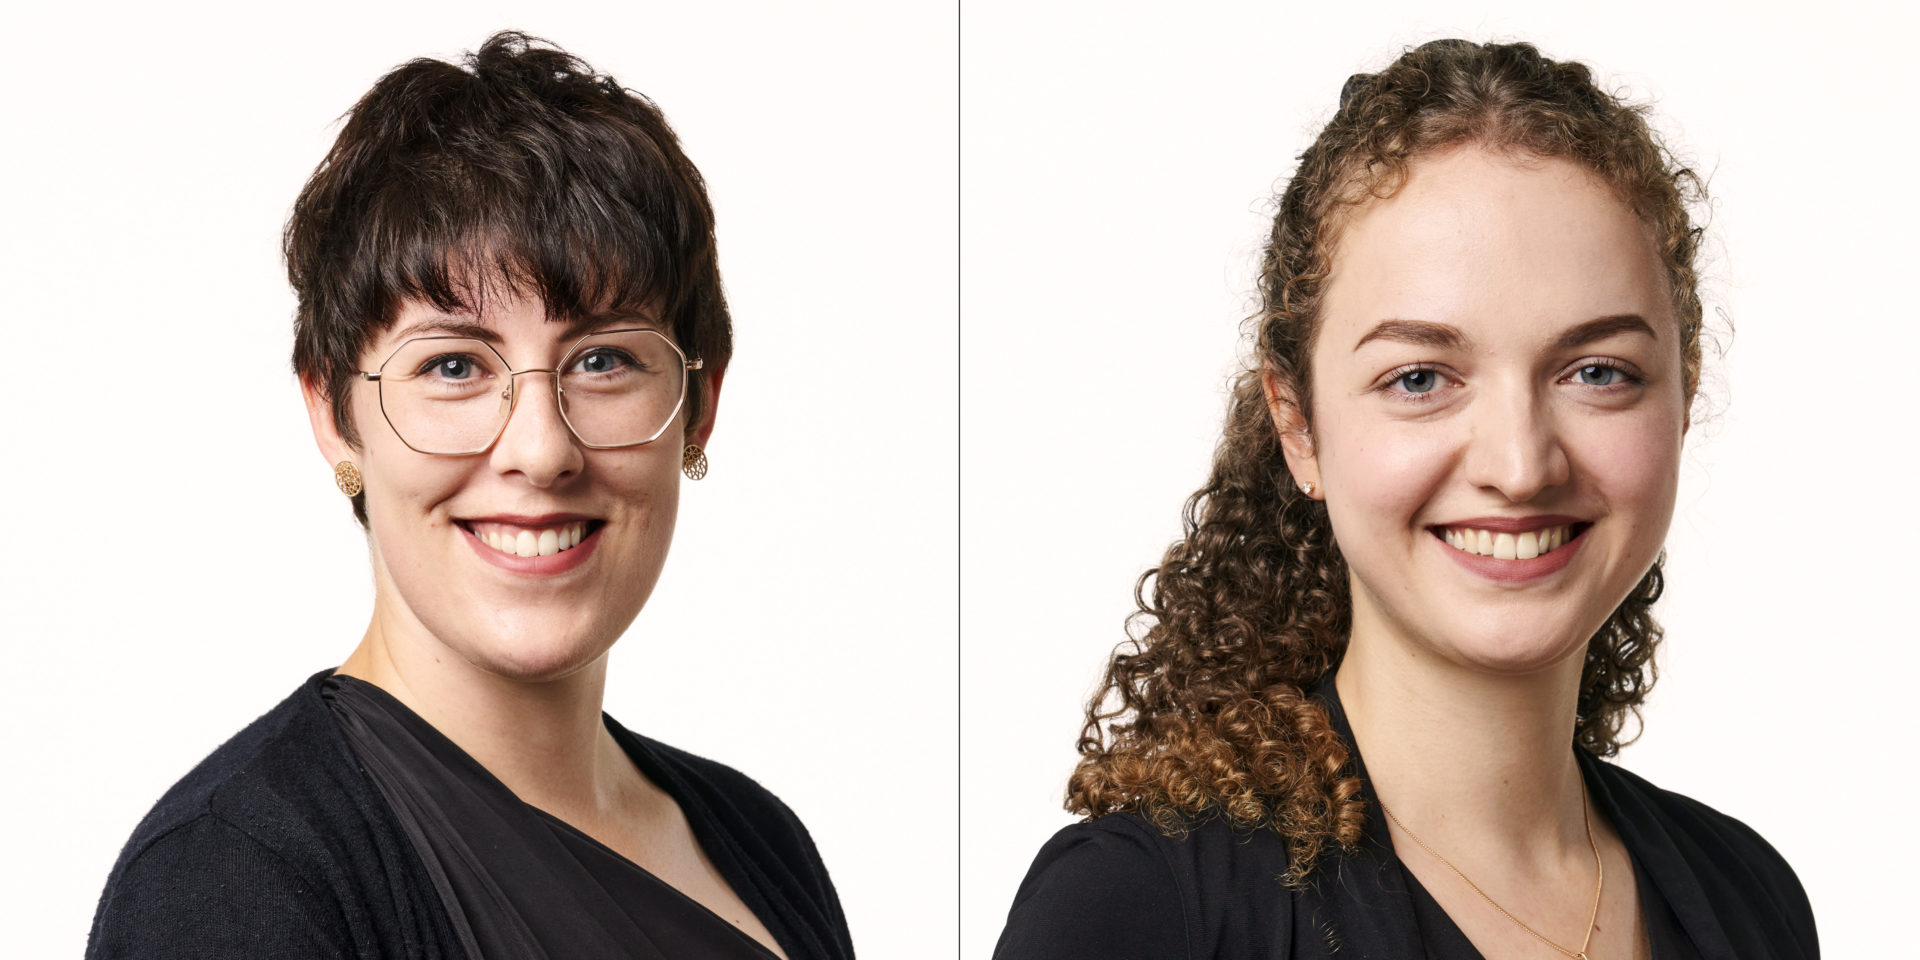 RSNO appoints Beth Woodford and Veronica Marziano as new members